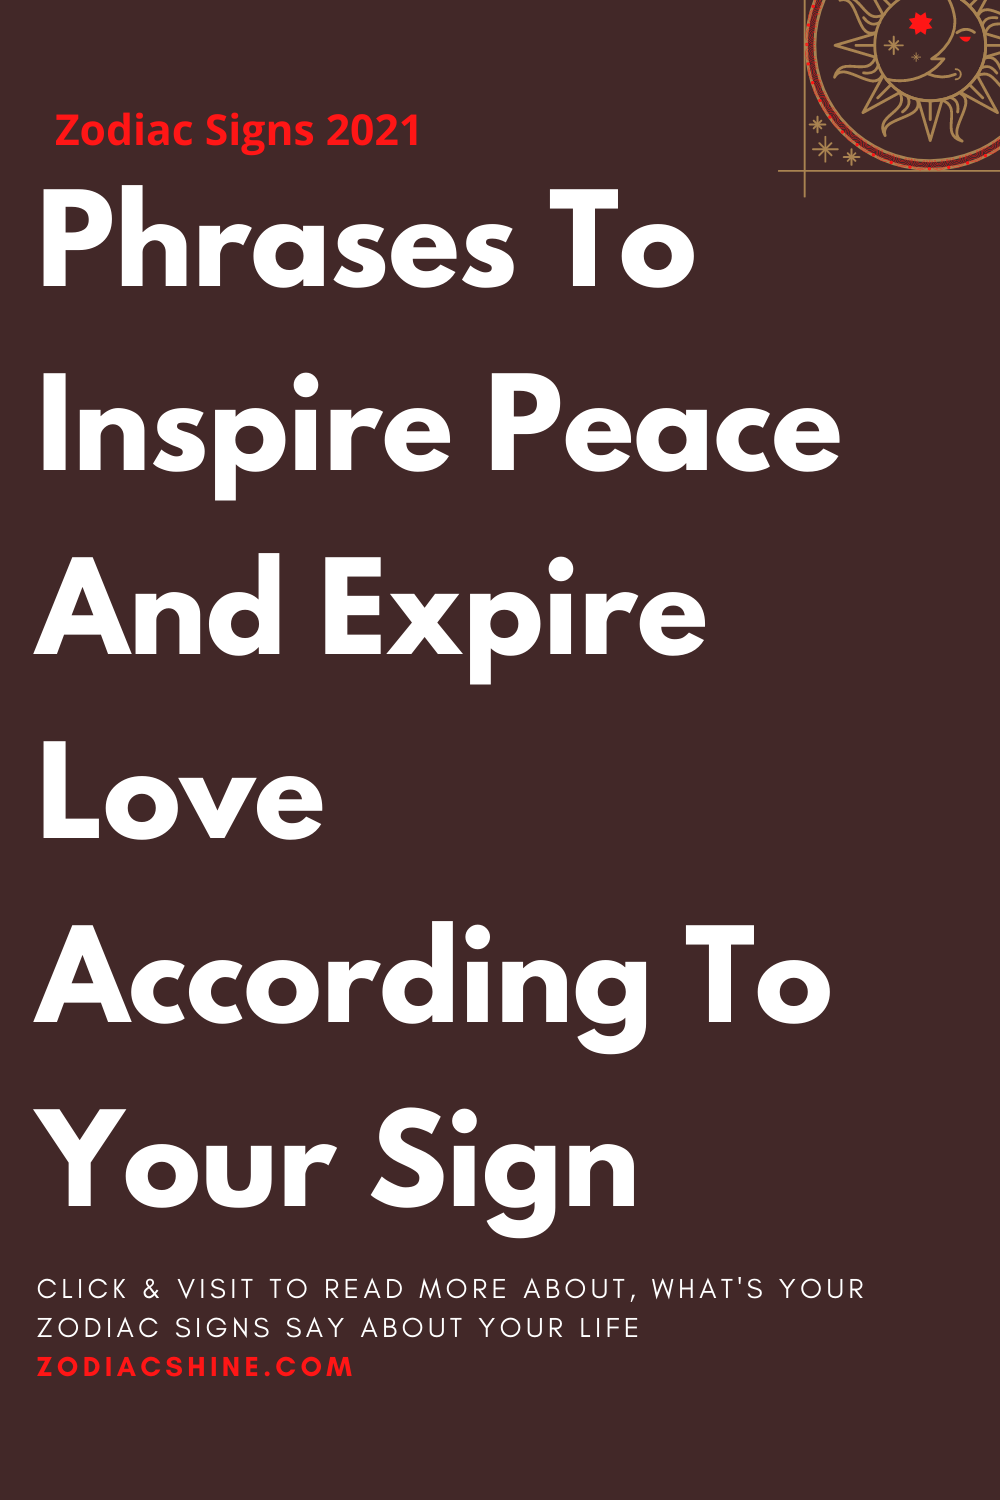 Phrases To Inspire Peace And Expire Love According To Your Sign